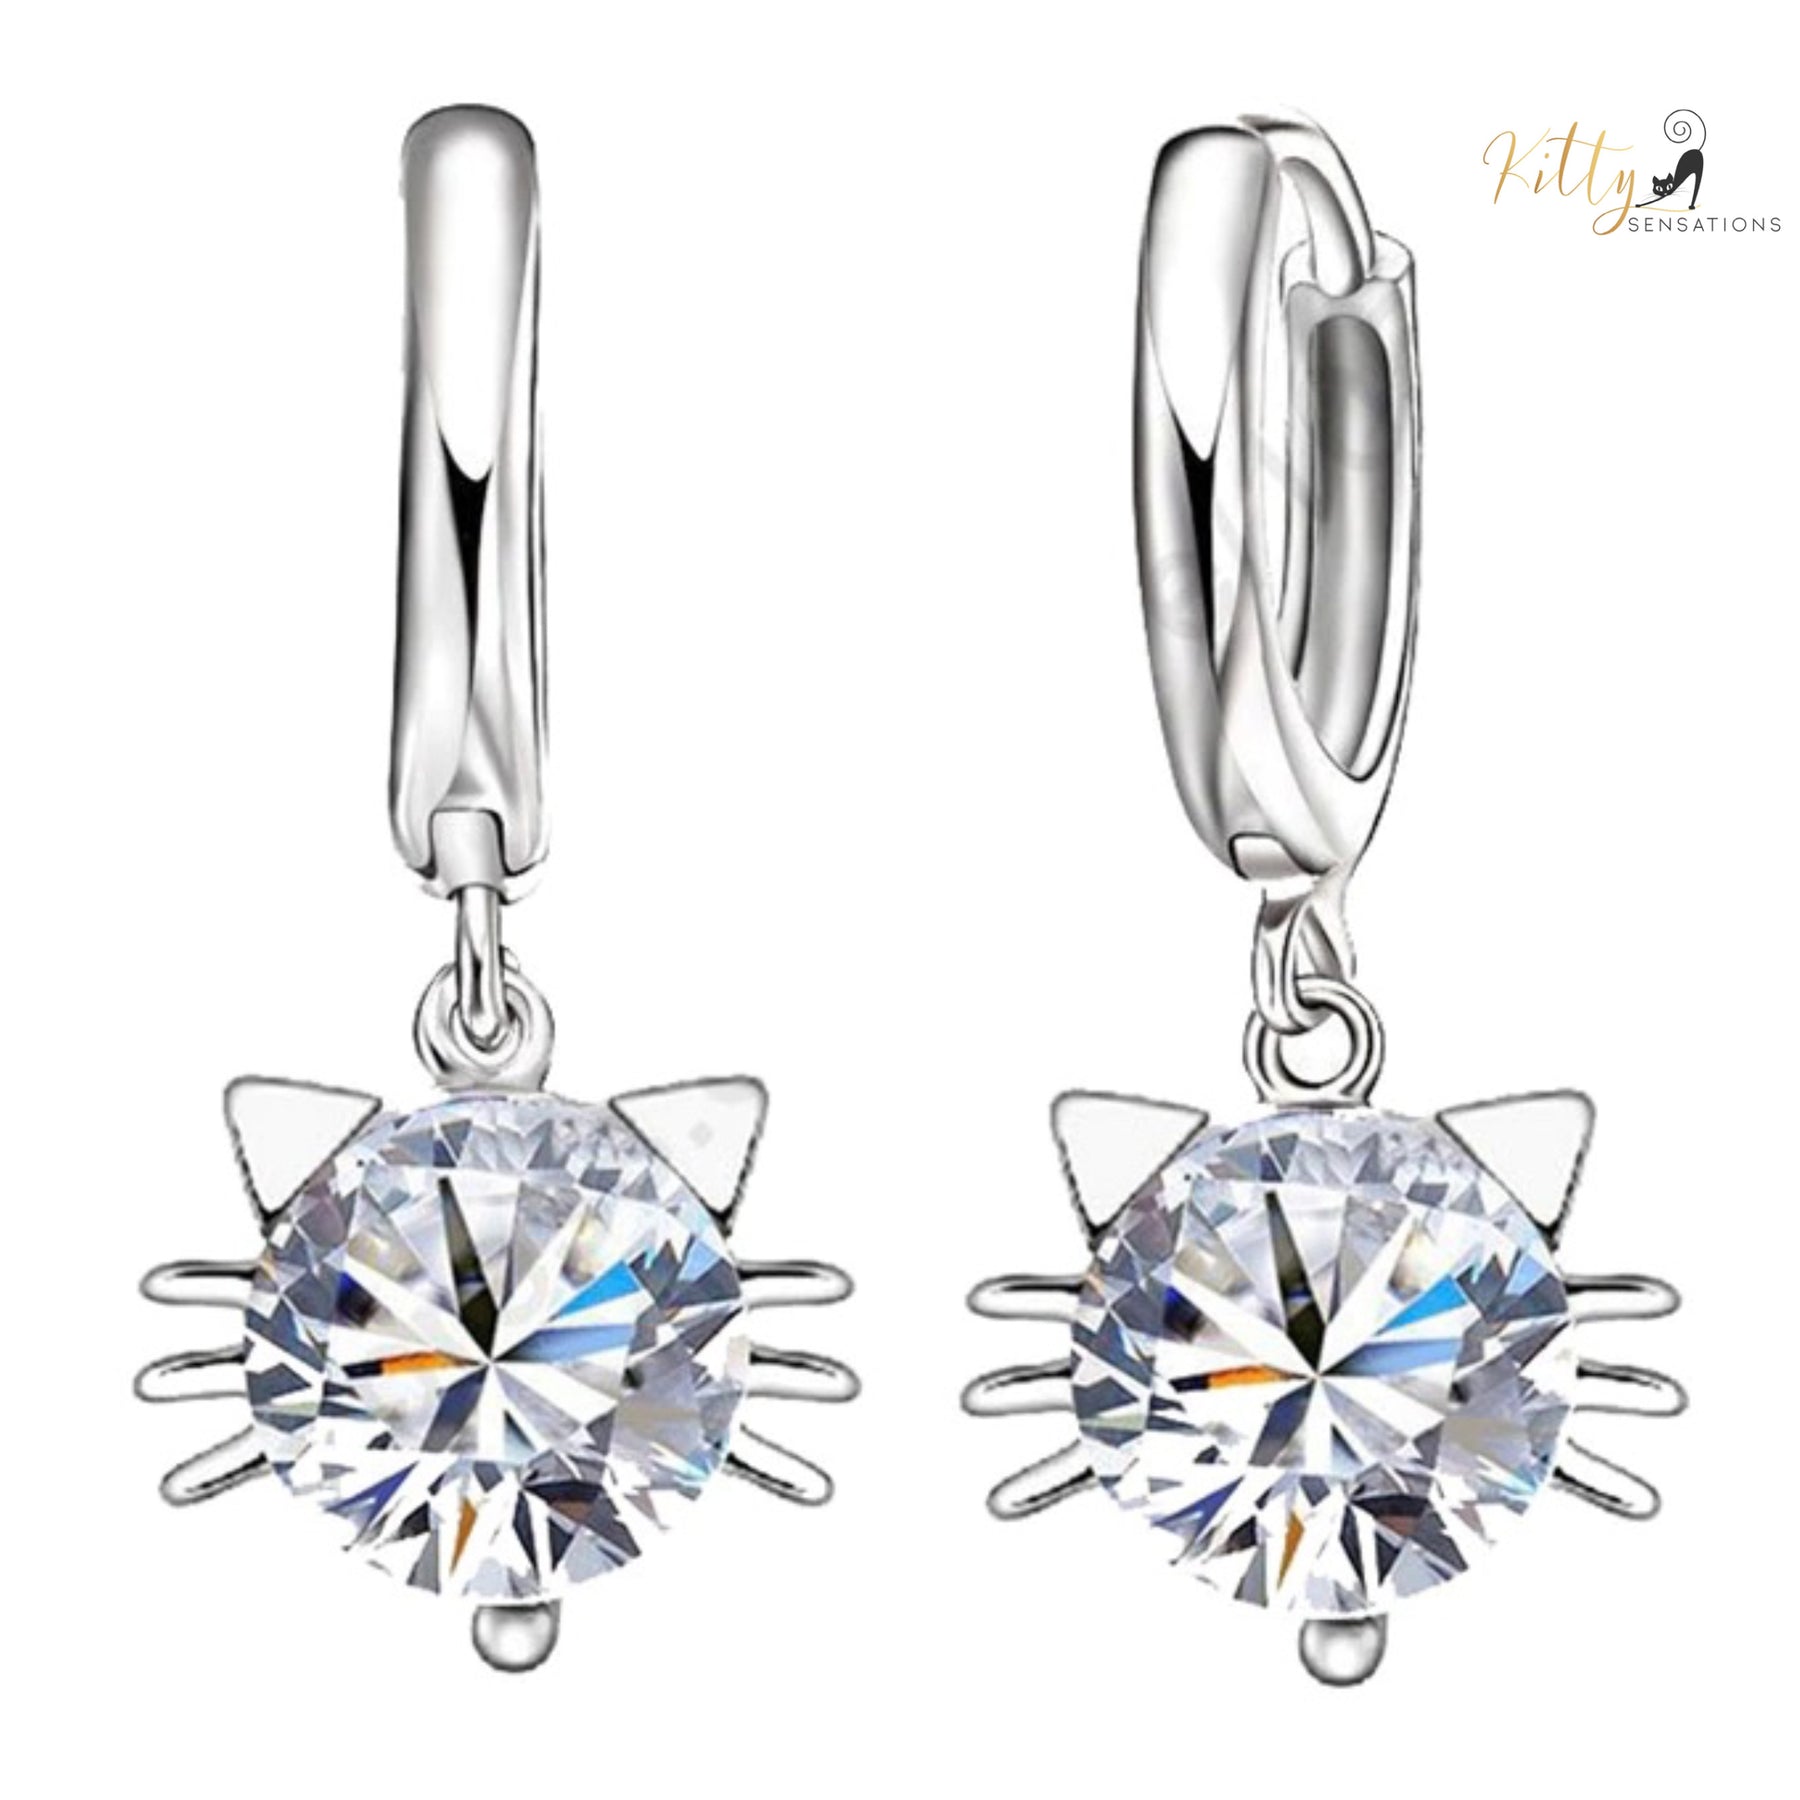 Cubic Zirconia Cat Earrings - Stud or Dangling - Your Choice! (Solid 925 Sterling Silver)